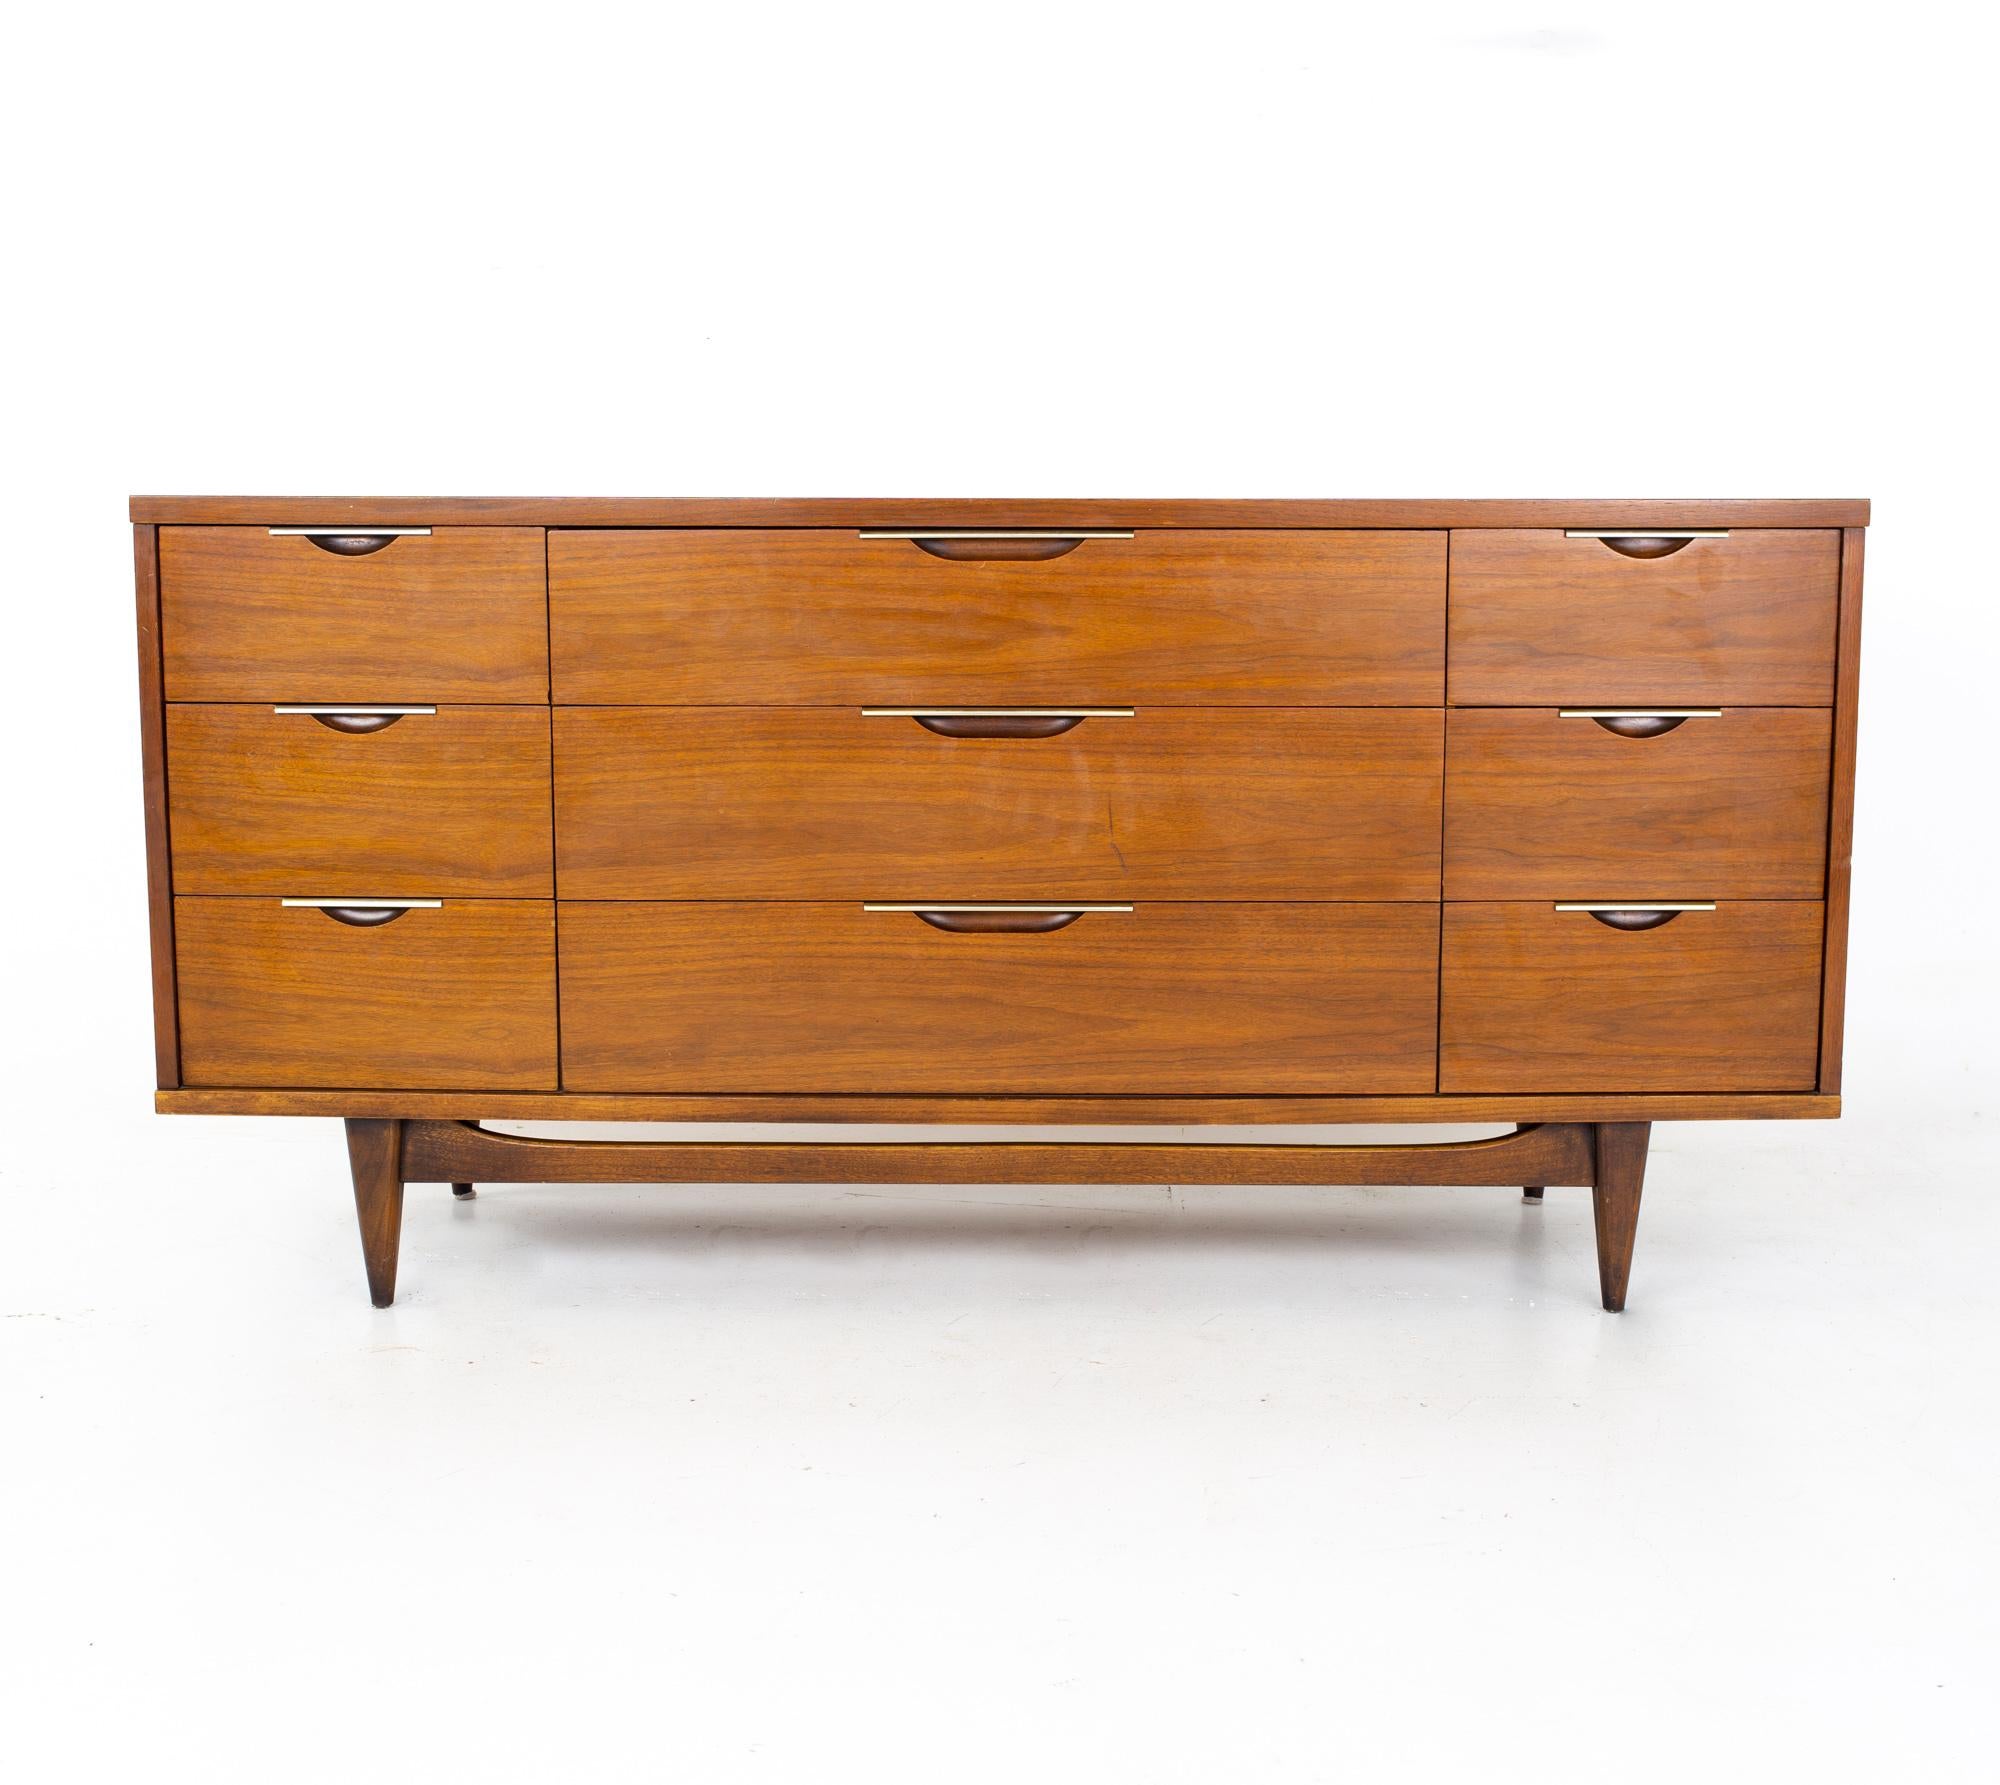 Kent Coffey Tableau mid-century walnut and laminate 9 drawer lowboy dresser.

The dresser measures: 64.25 wide x 19.25 deep x 31.5 inches high

All pieces of furniture can be had in what we call restored vintage condition. That means the piece